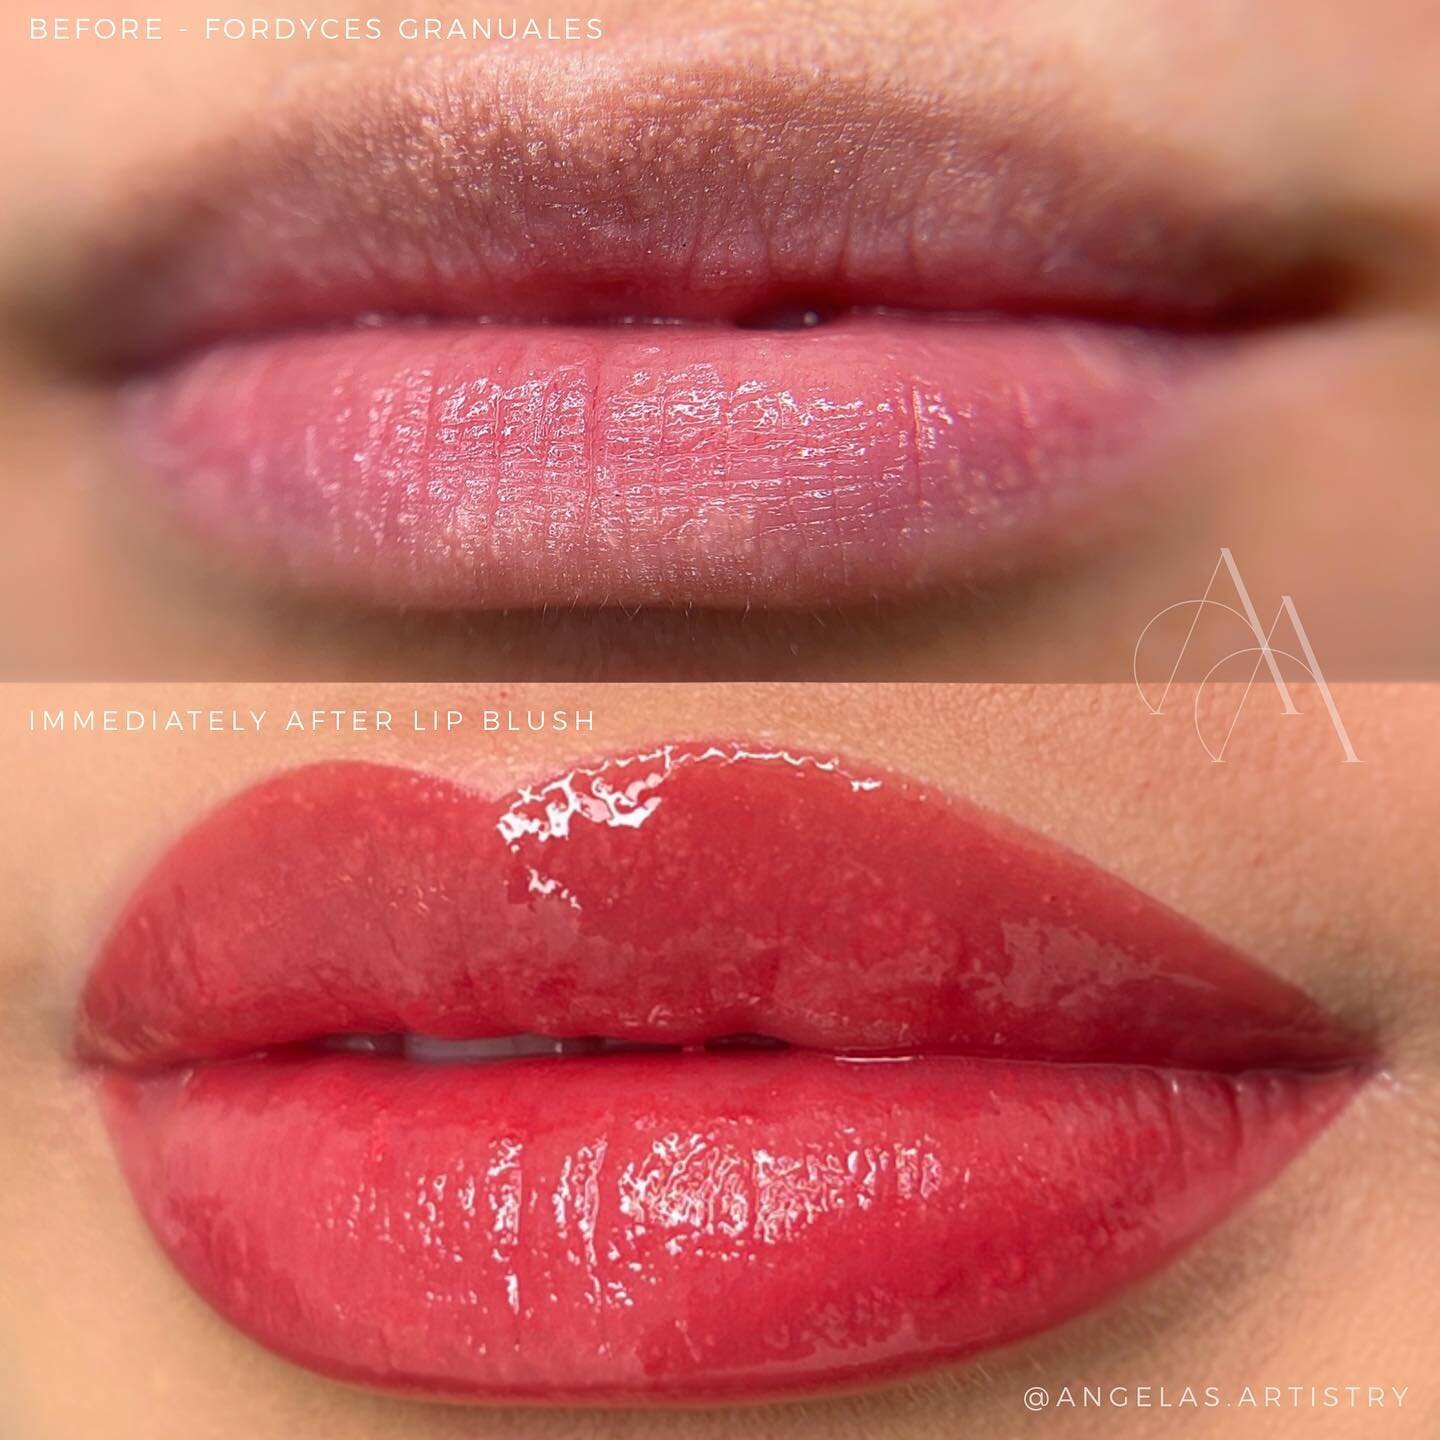 Lip blush on Fordyces Granules

Fordyces granules are white sebaceous glands on your lips. It can make you lose colour and definition in your lips. Lip blush can bring back the colour and definition 💯

__________________________________________

𝘼?